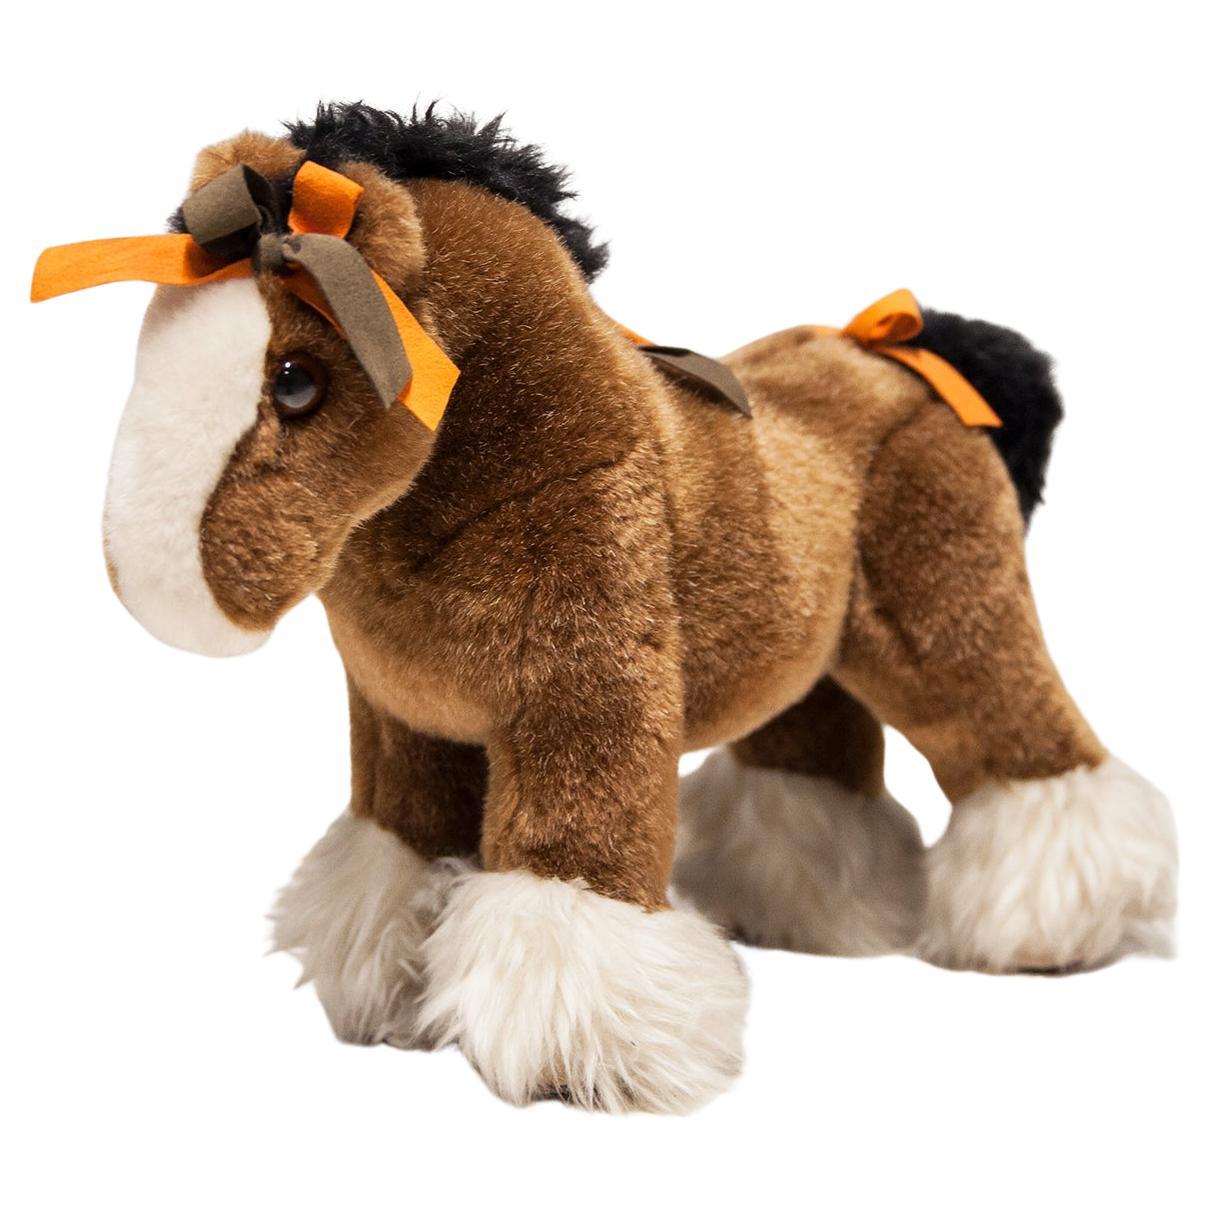 Hermes Stuffed Toy Hermy Horse For Sale